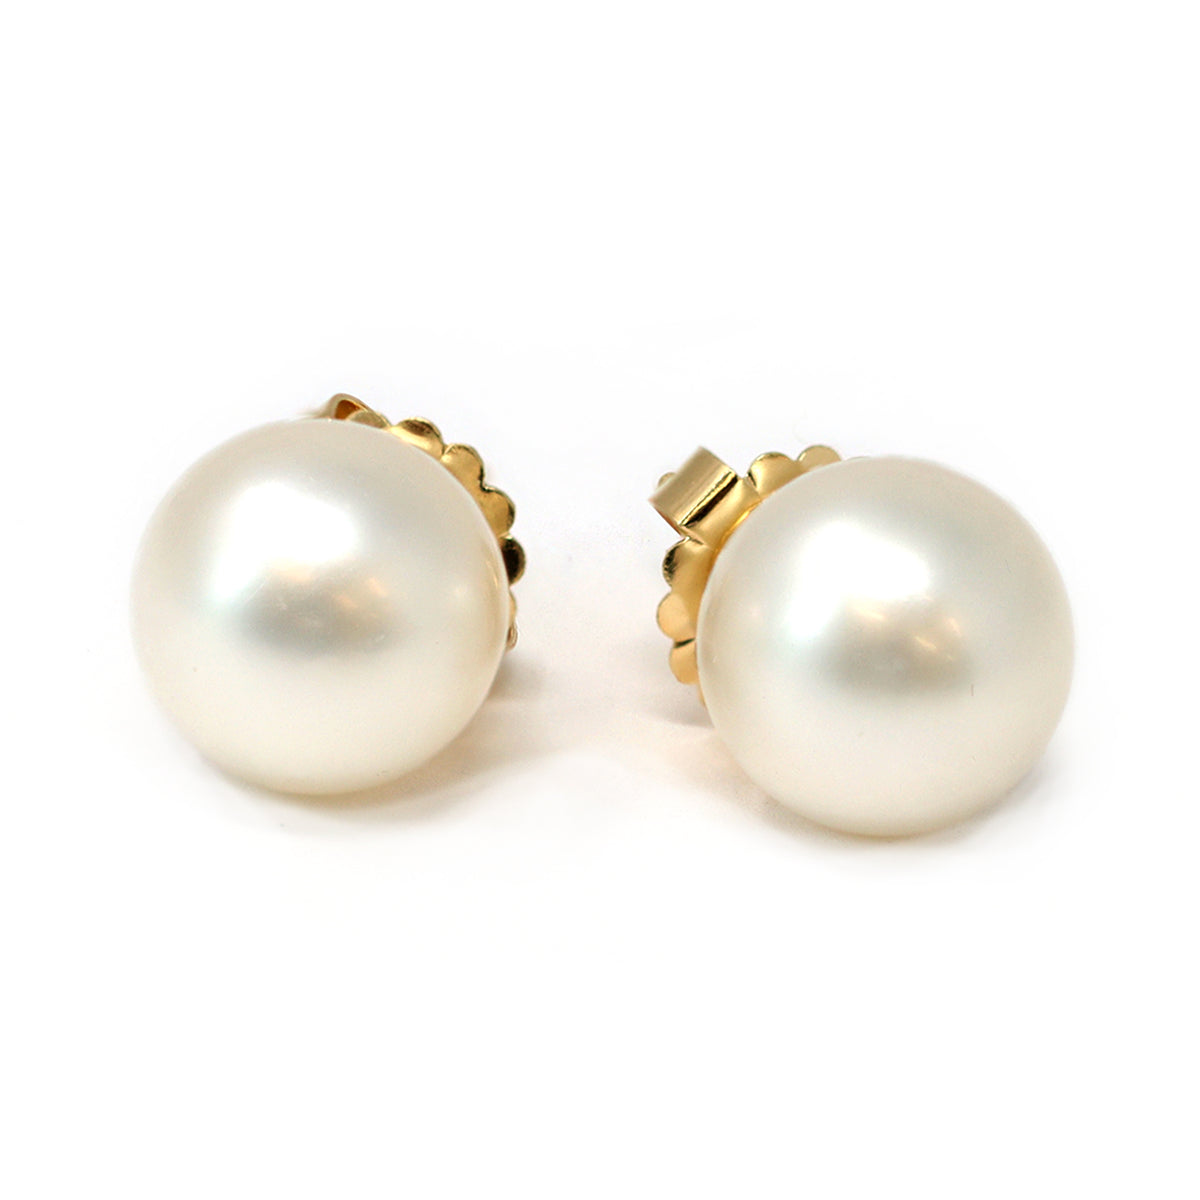 White South Sea Pearl Stud Earrings in 18 Karat Yellow Gold front view